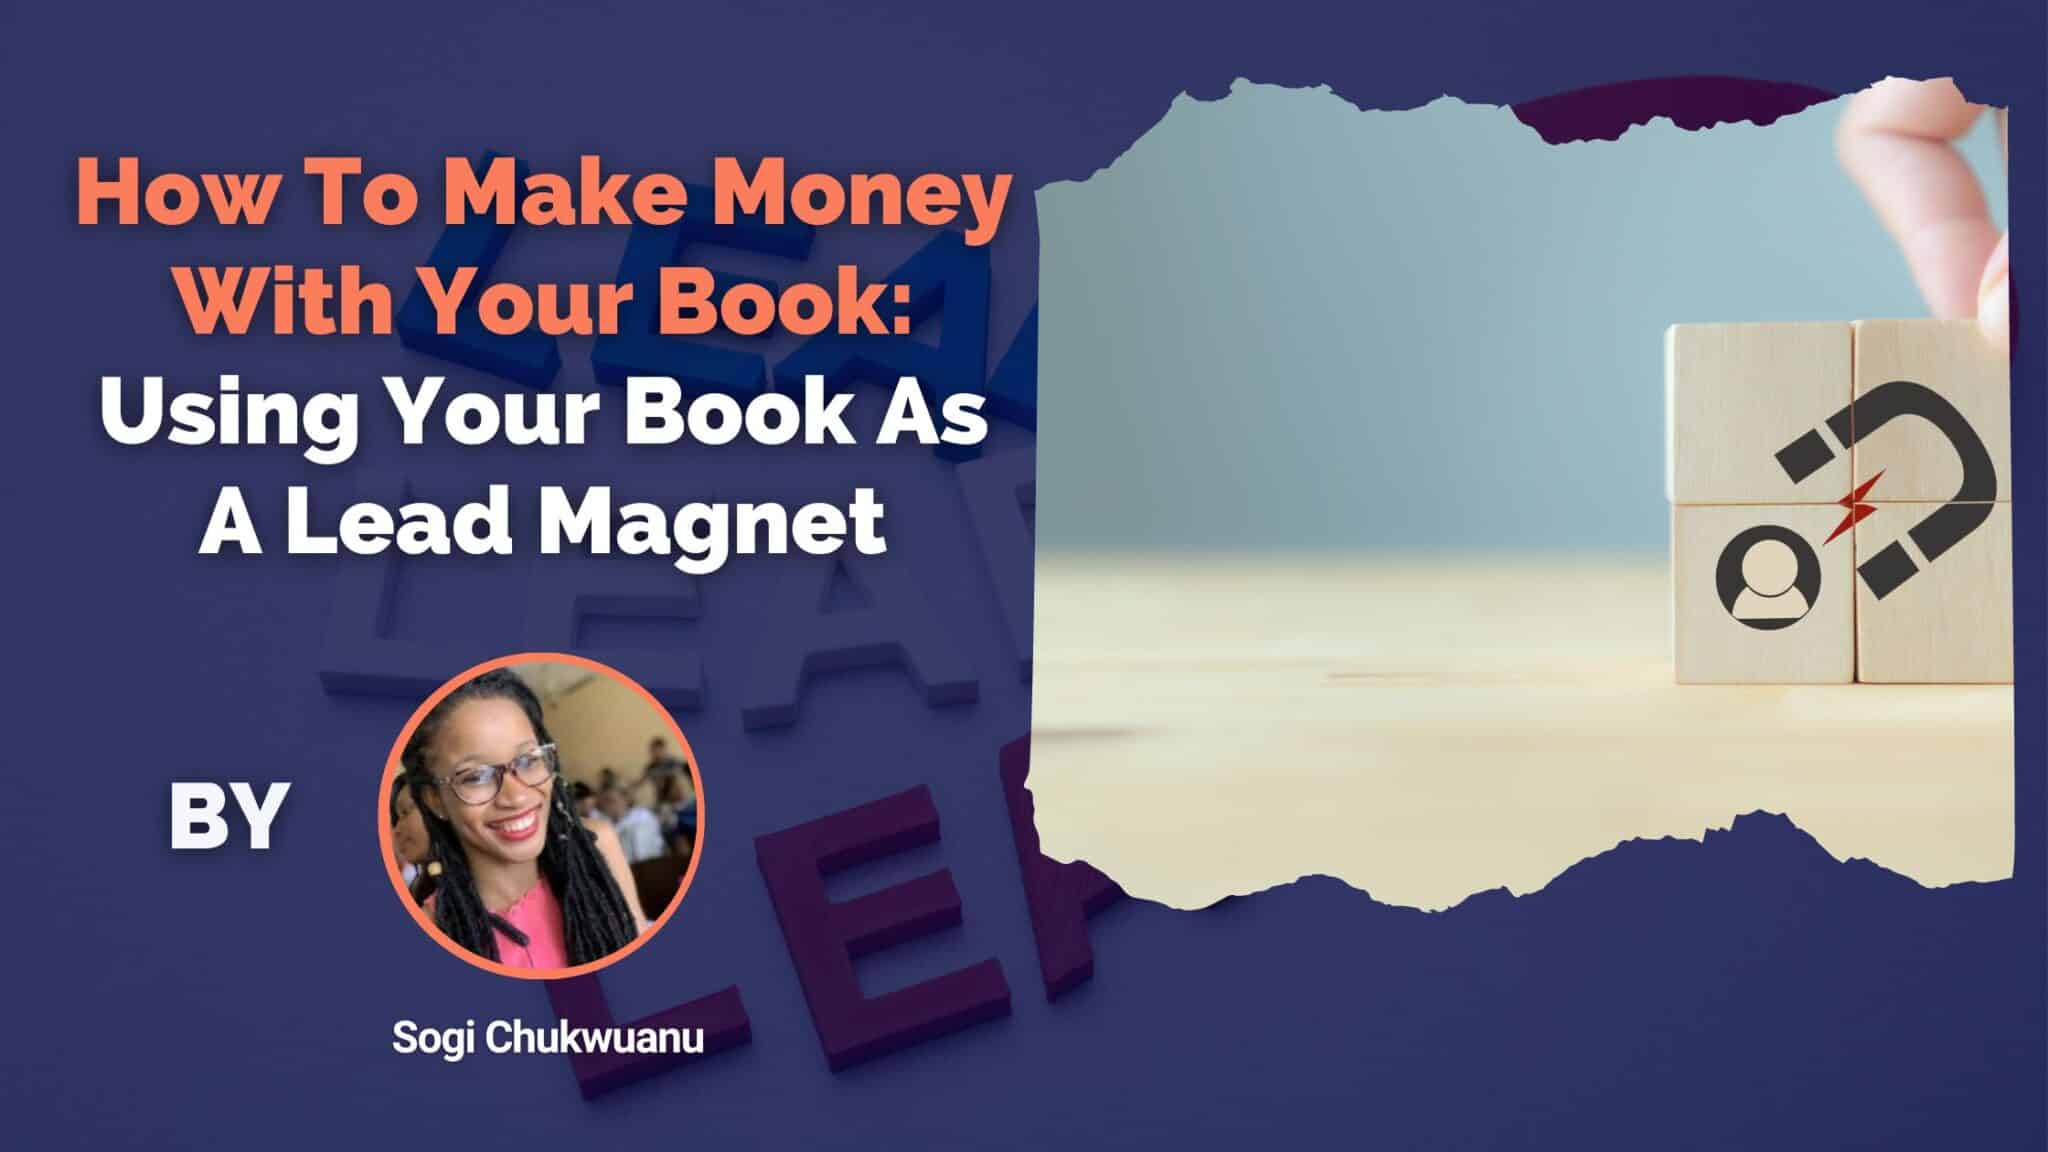 How To Make Money With Your Book: Using Your Book As A Lead Magnet